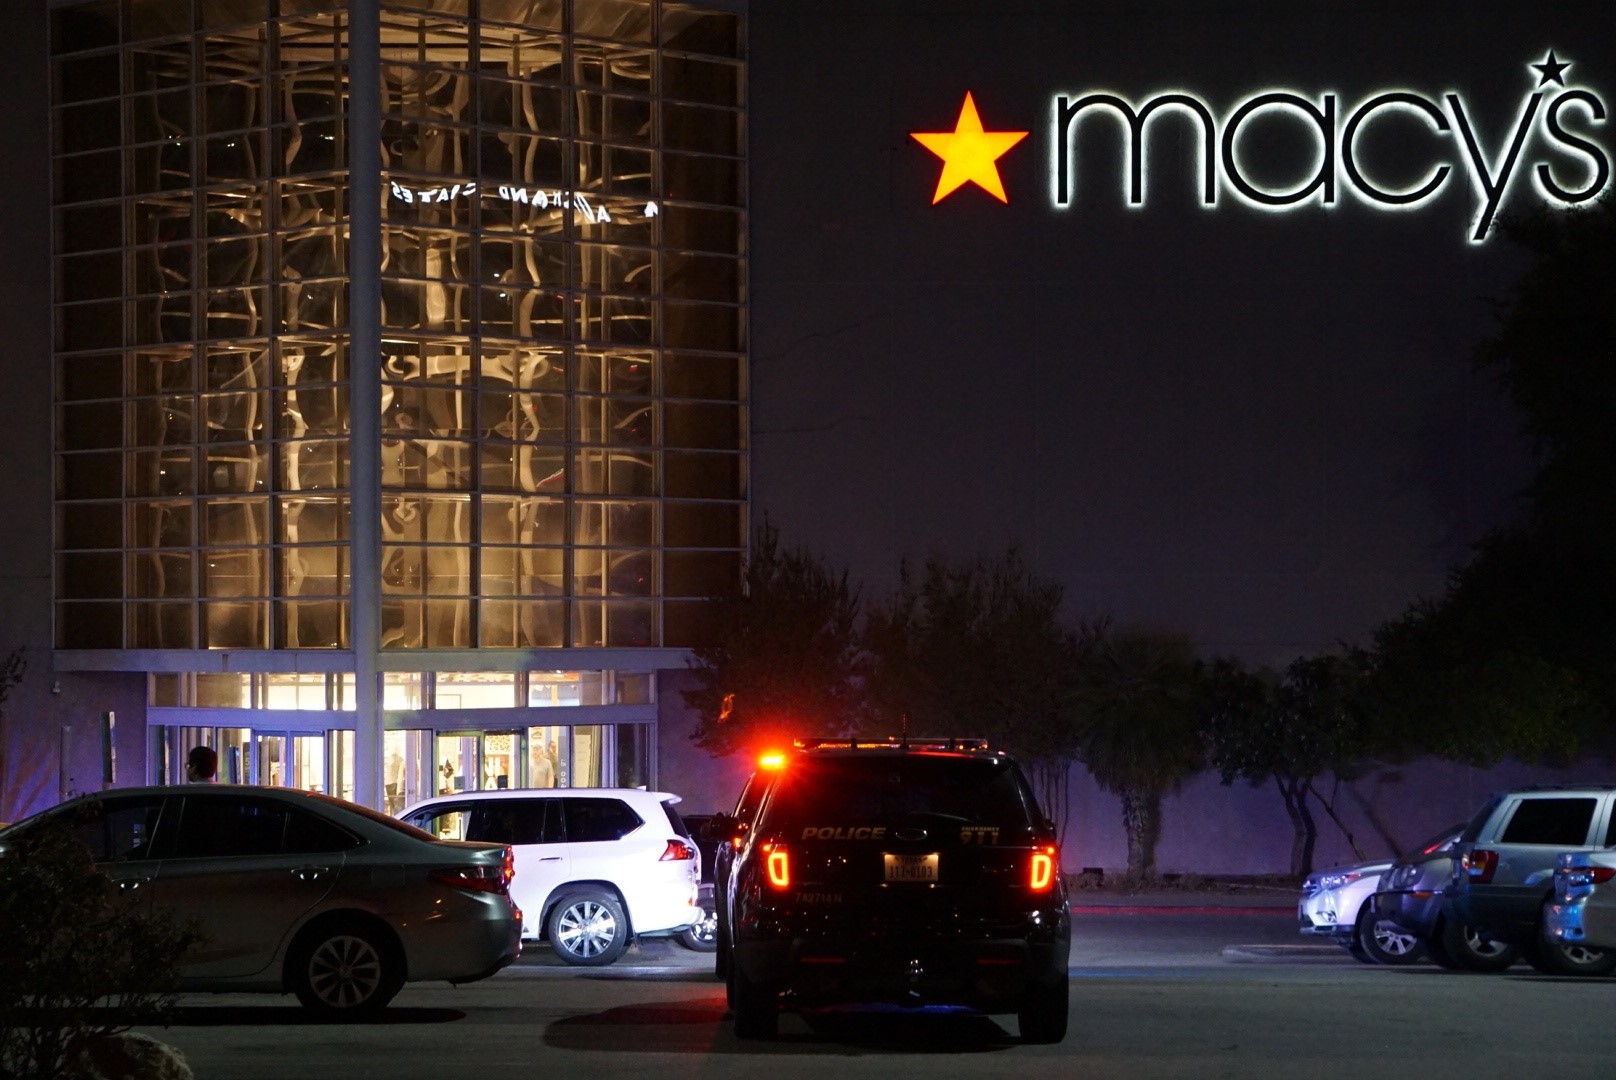 One person shot at North Star Mall, authorities say; SAPD responding